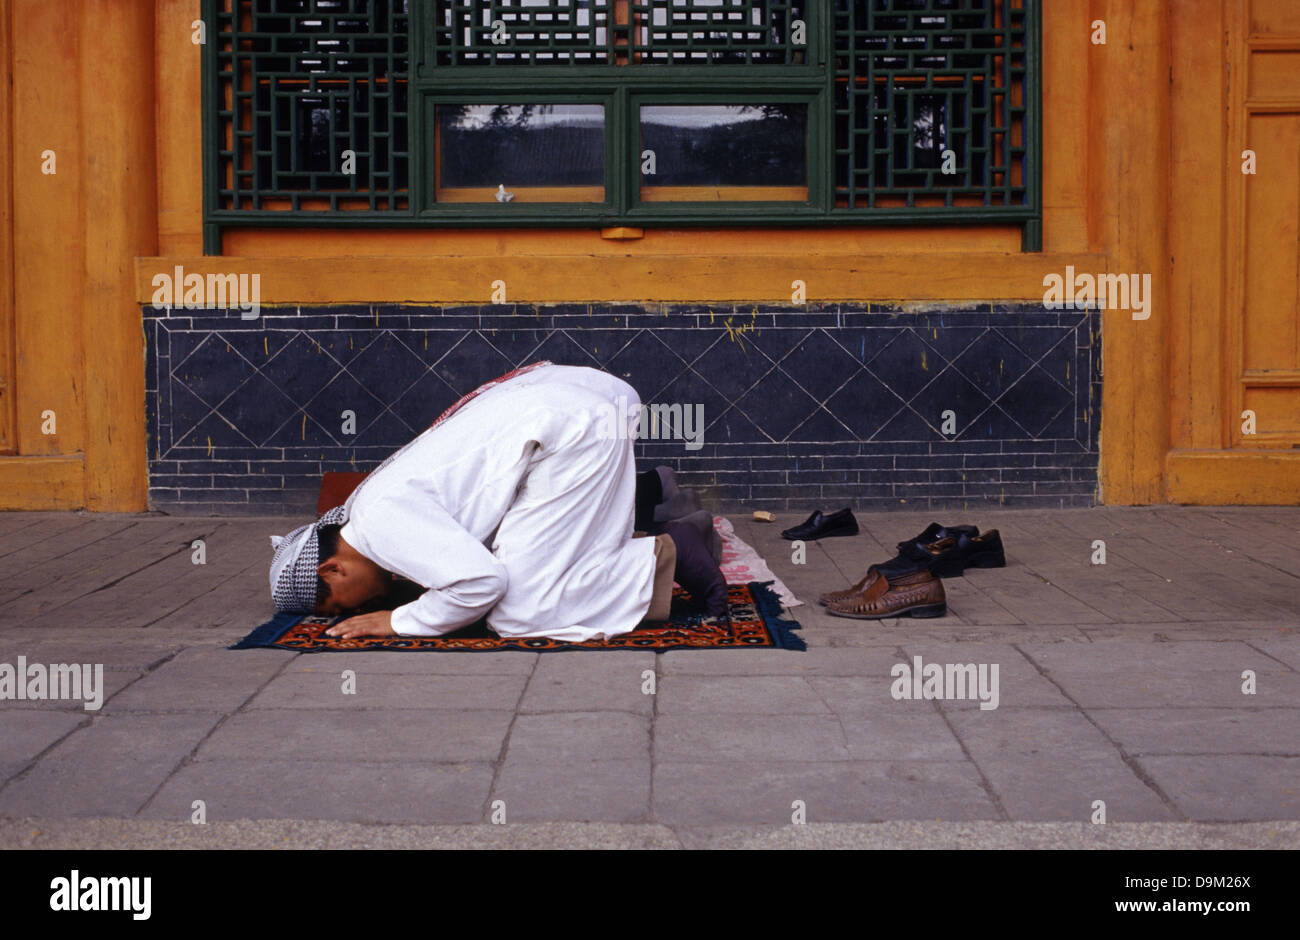 Hui Muslims worshipers praying at the courtyard of Dongguan Grand Mosque originally built in 1380 in Xining the capital of Qinghai province in western China Stock Photo